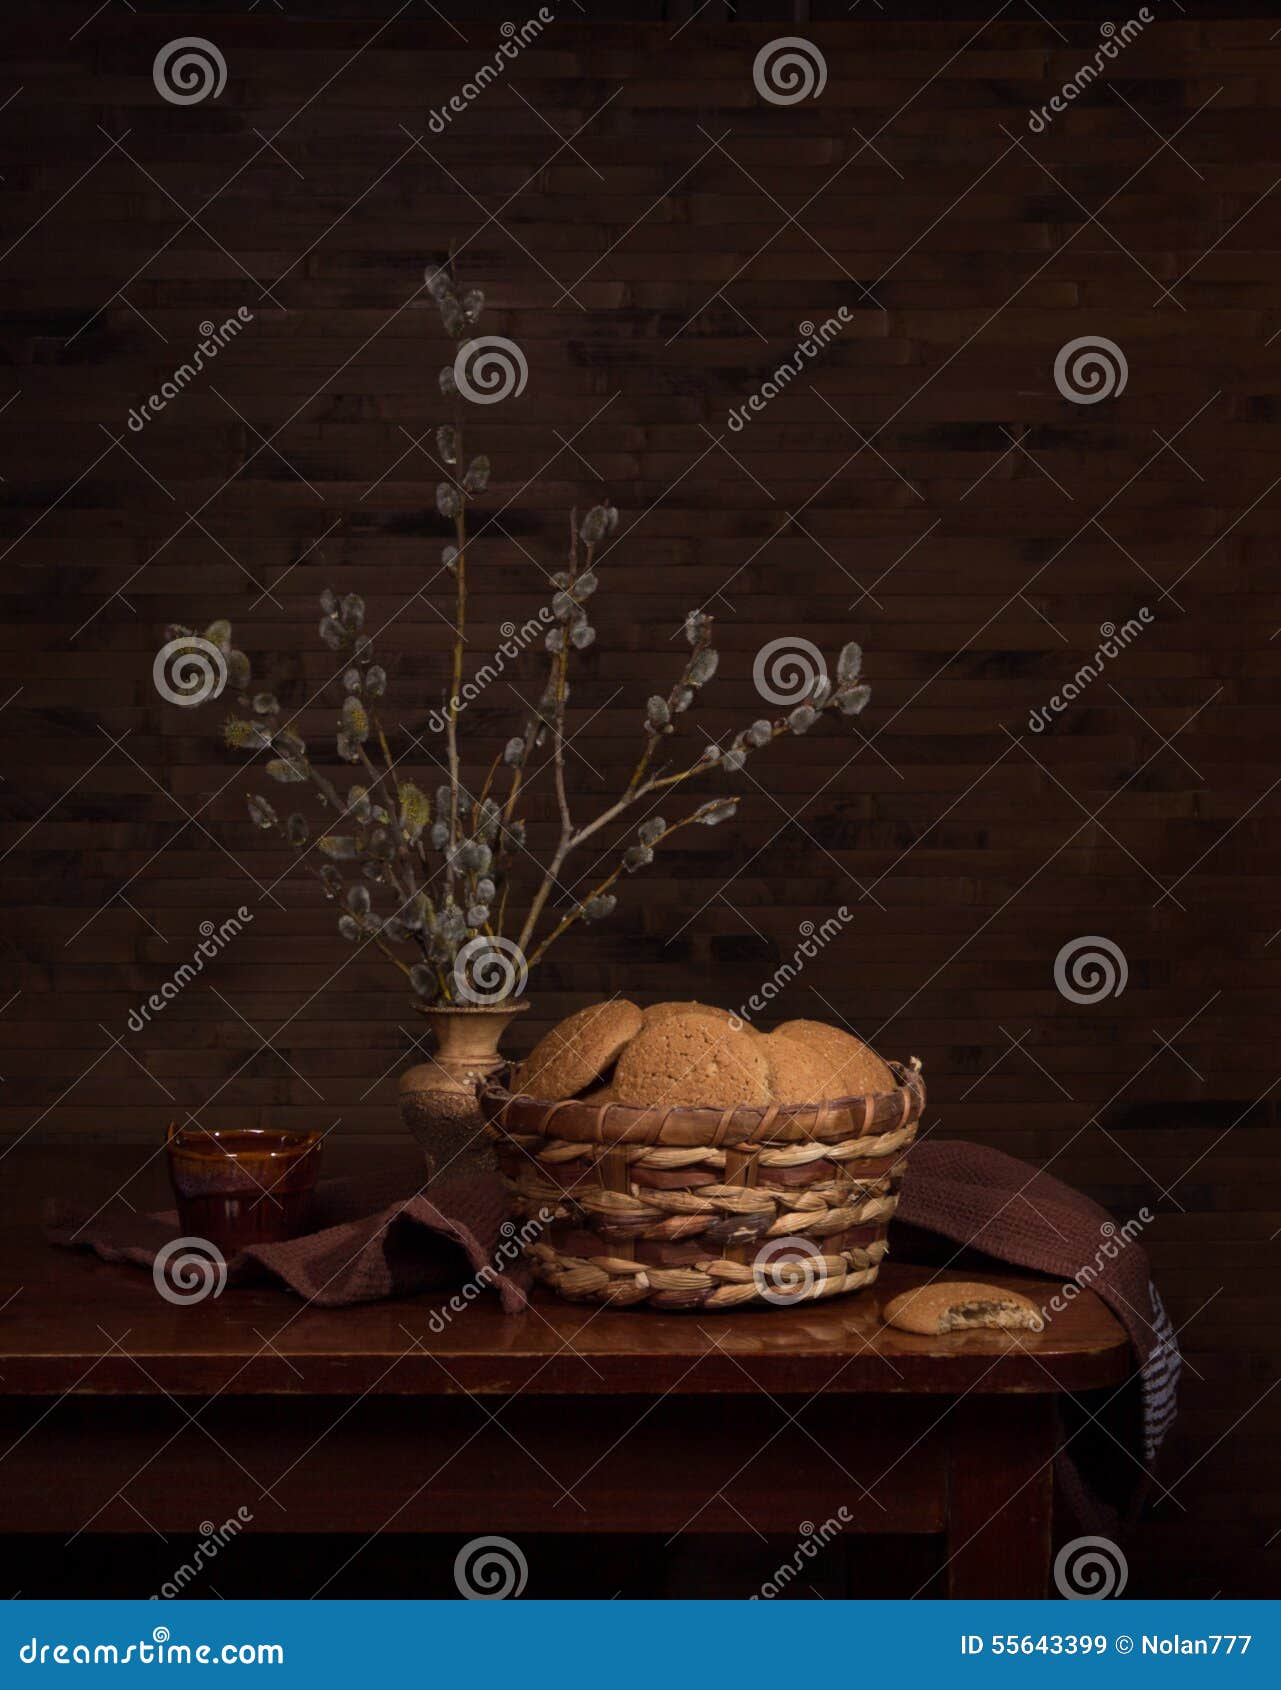 Vintage still life with cookies in a basket